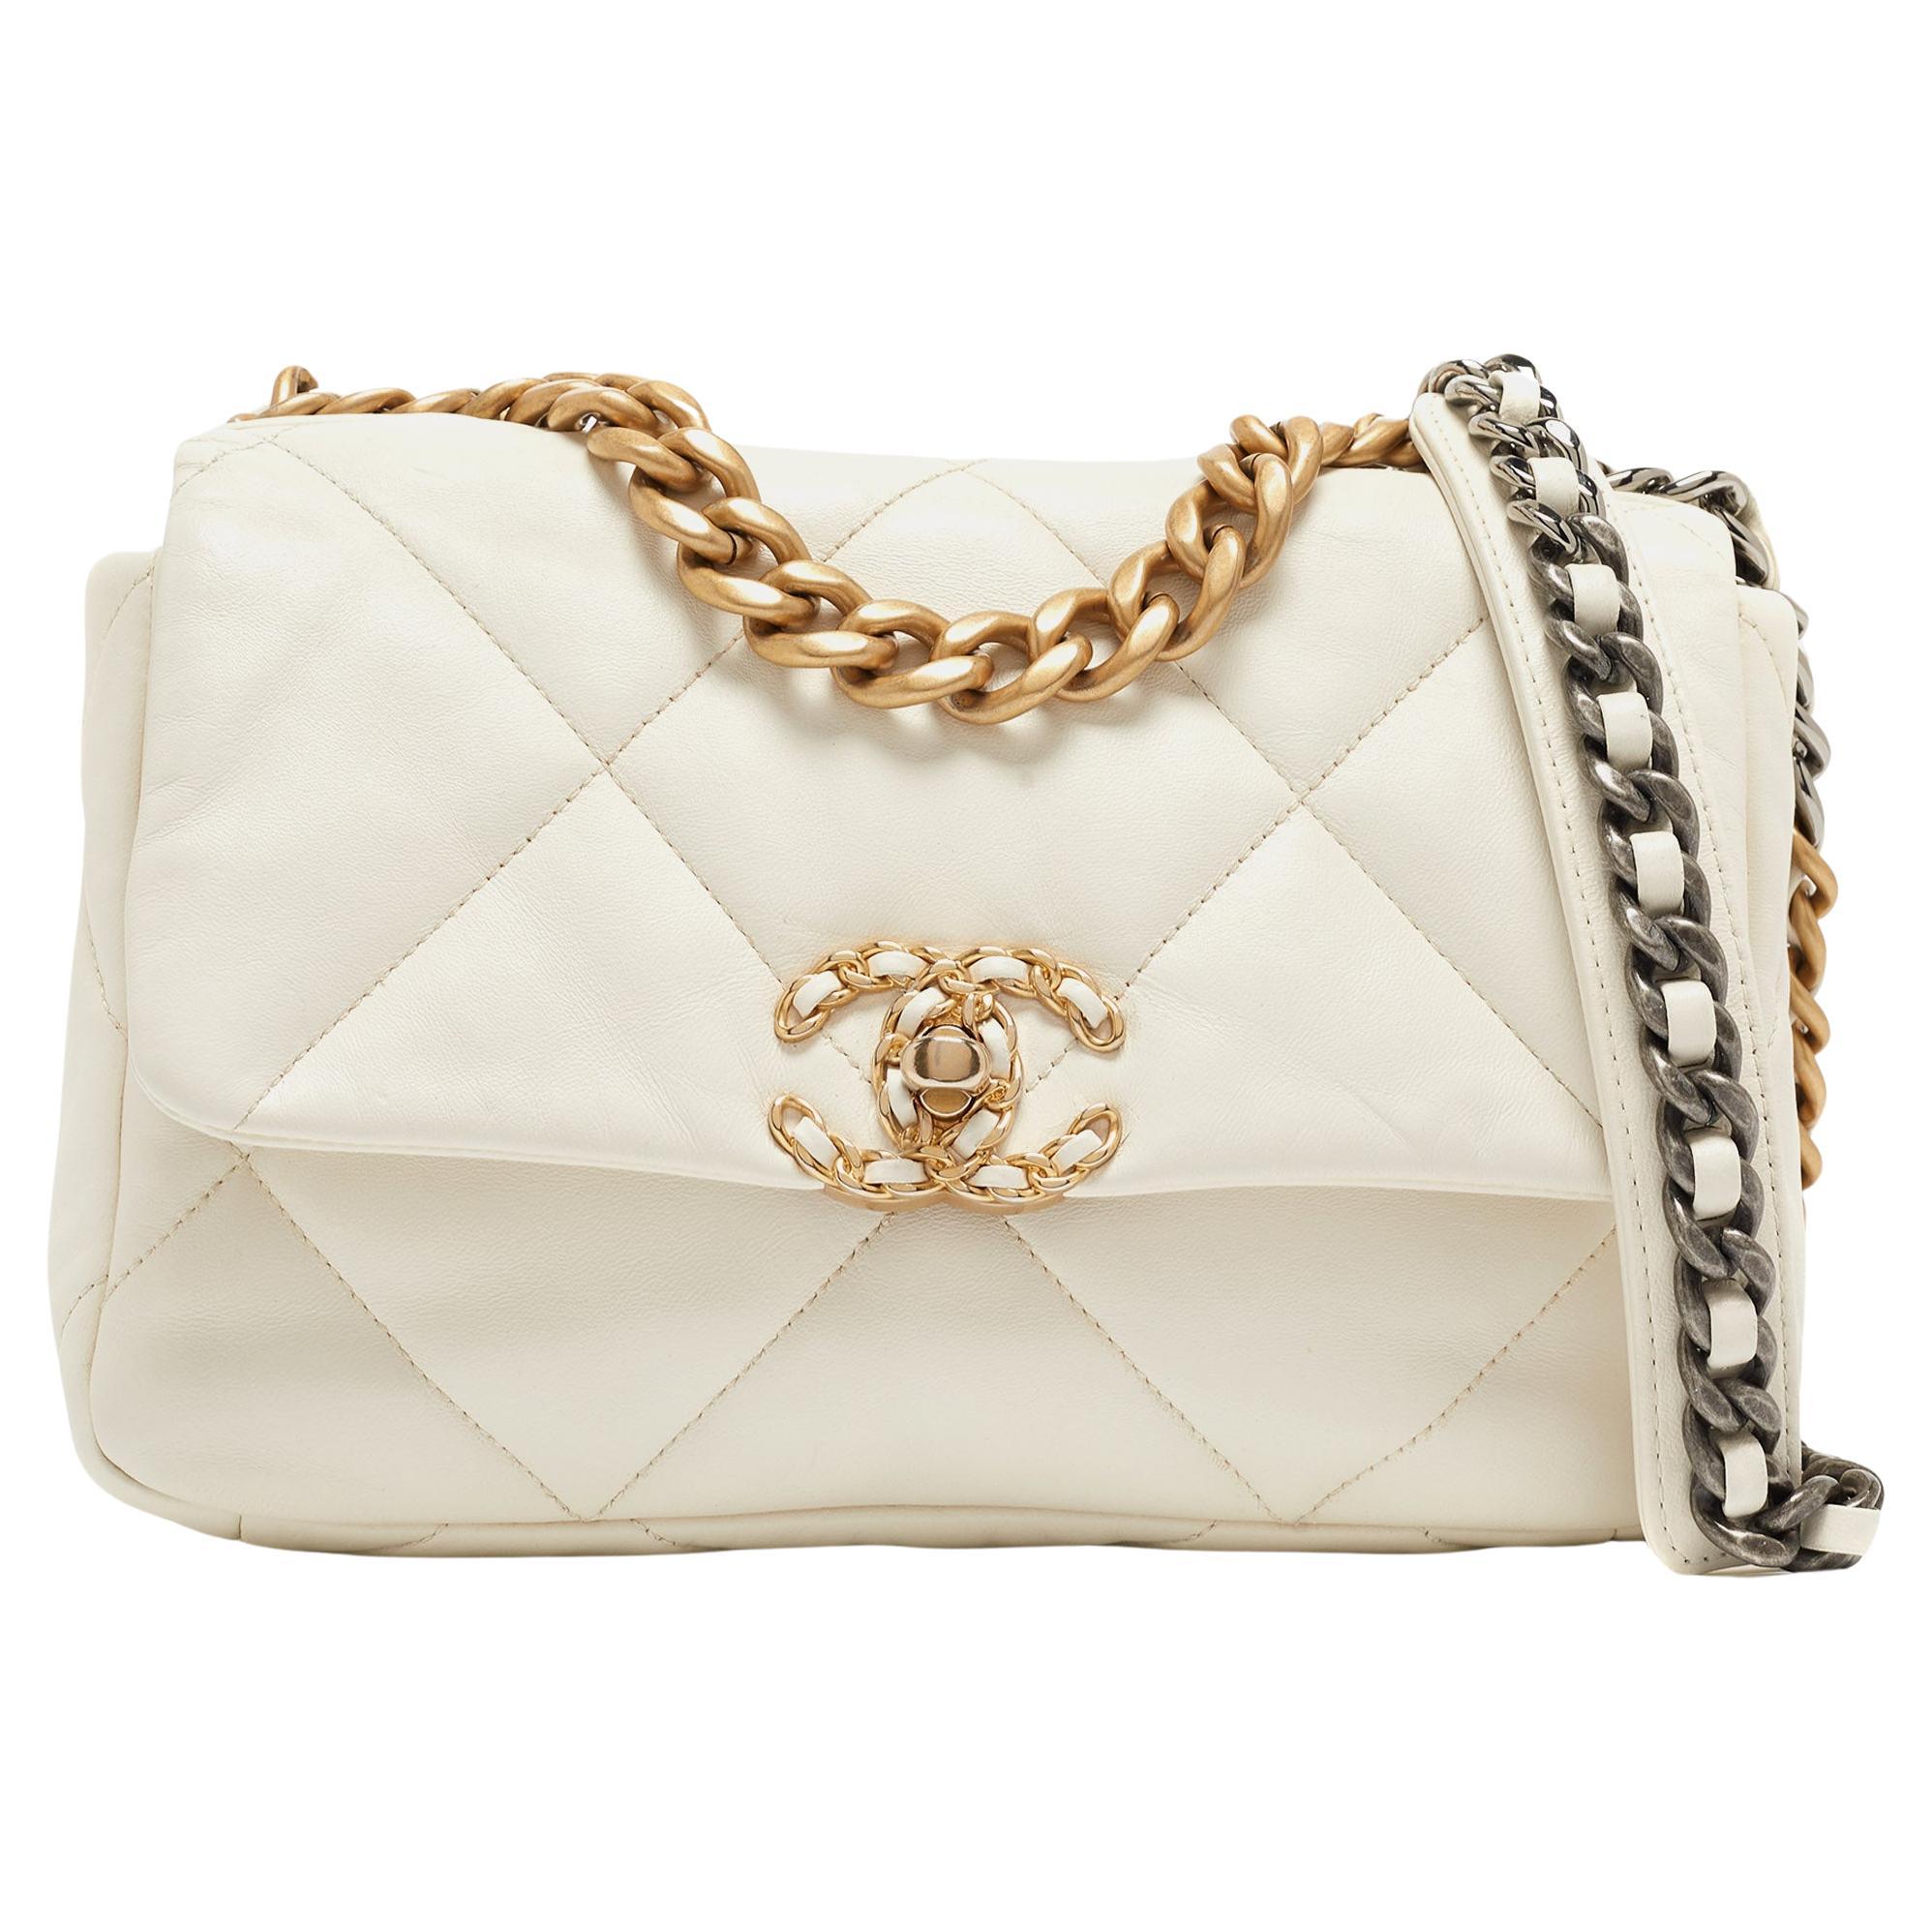 Chanel White Quilted Leather Small 19 Flap Bag